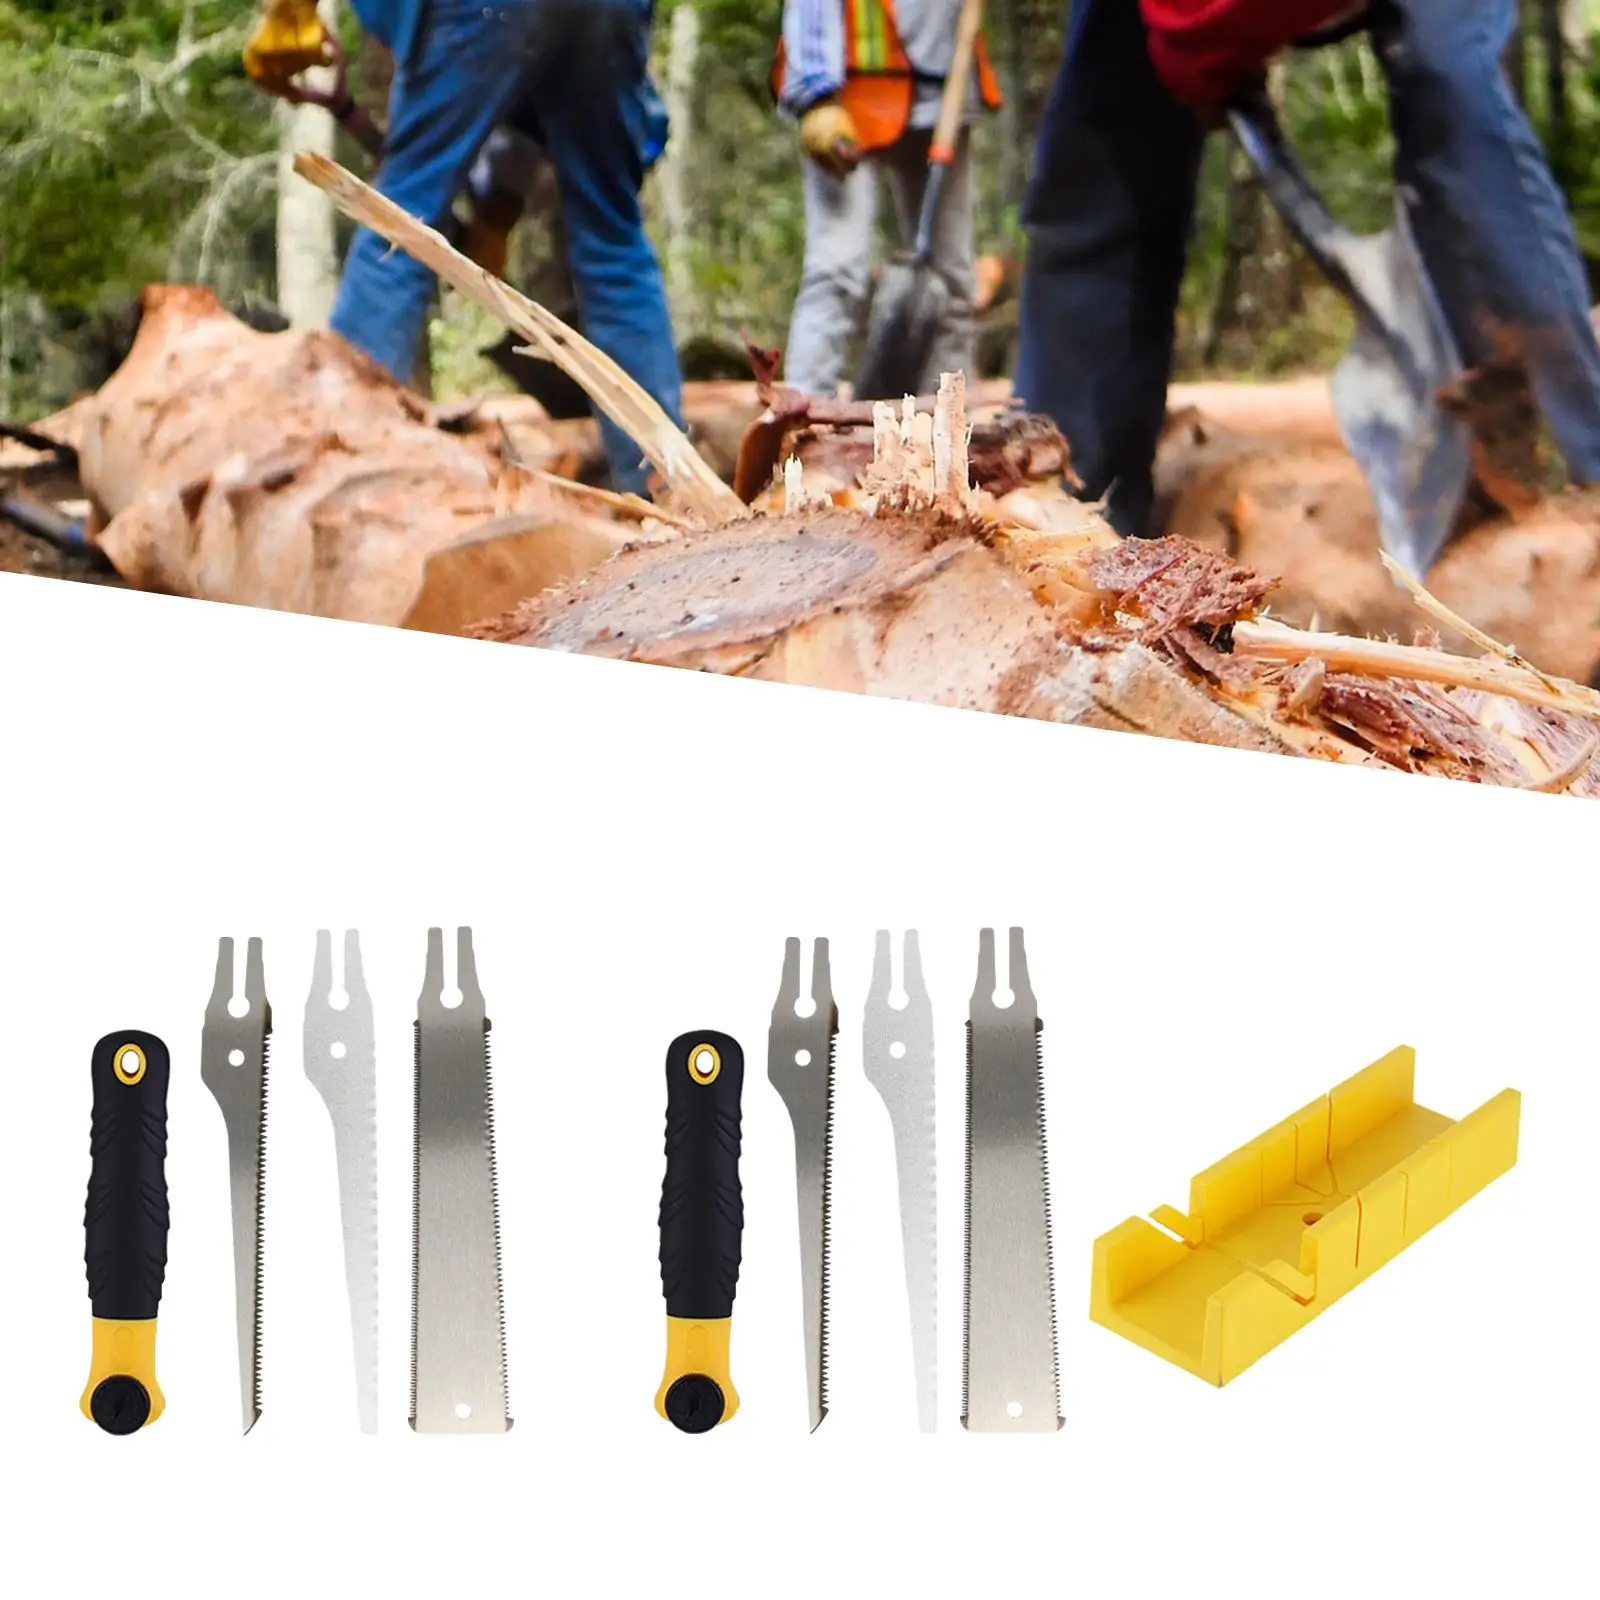 Manual Hand Saw Woodworking Tool Professional Multipurpose Handheld Garden Tool for Home Outdoor Cutting Pruning Trees DIY